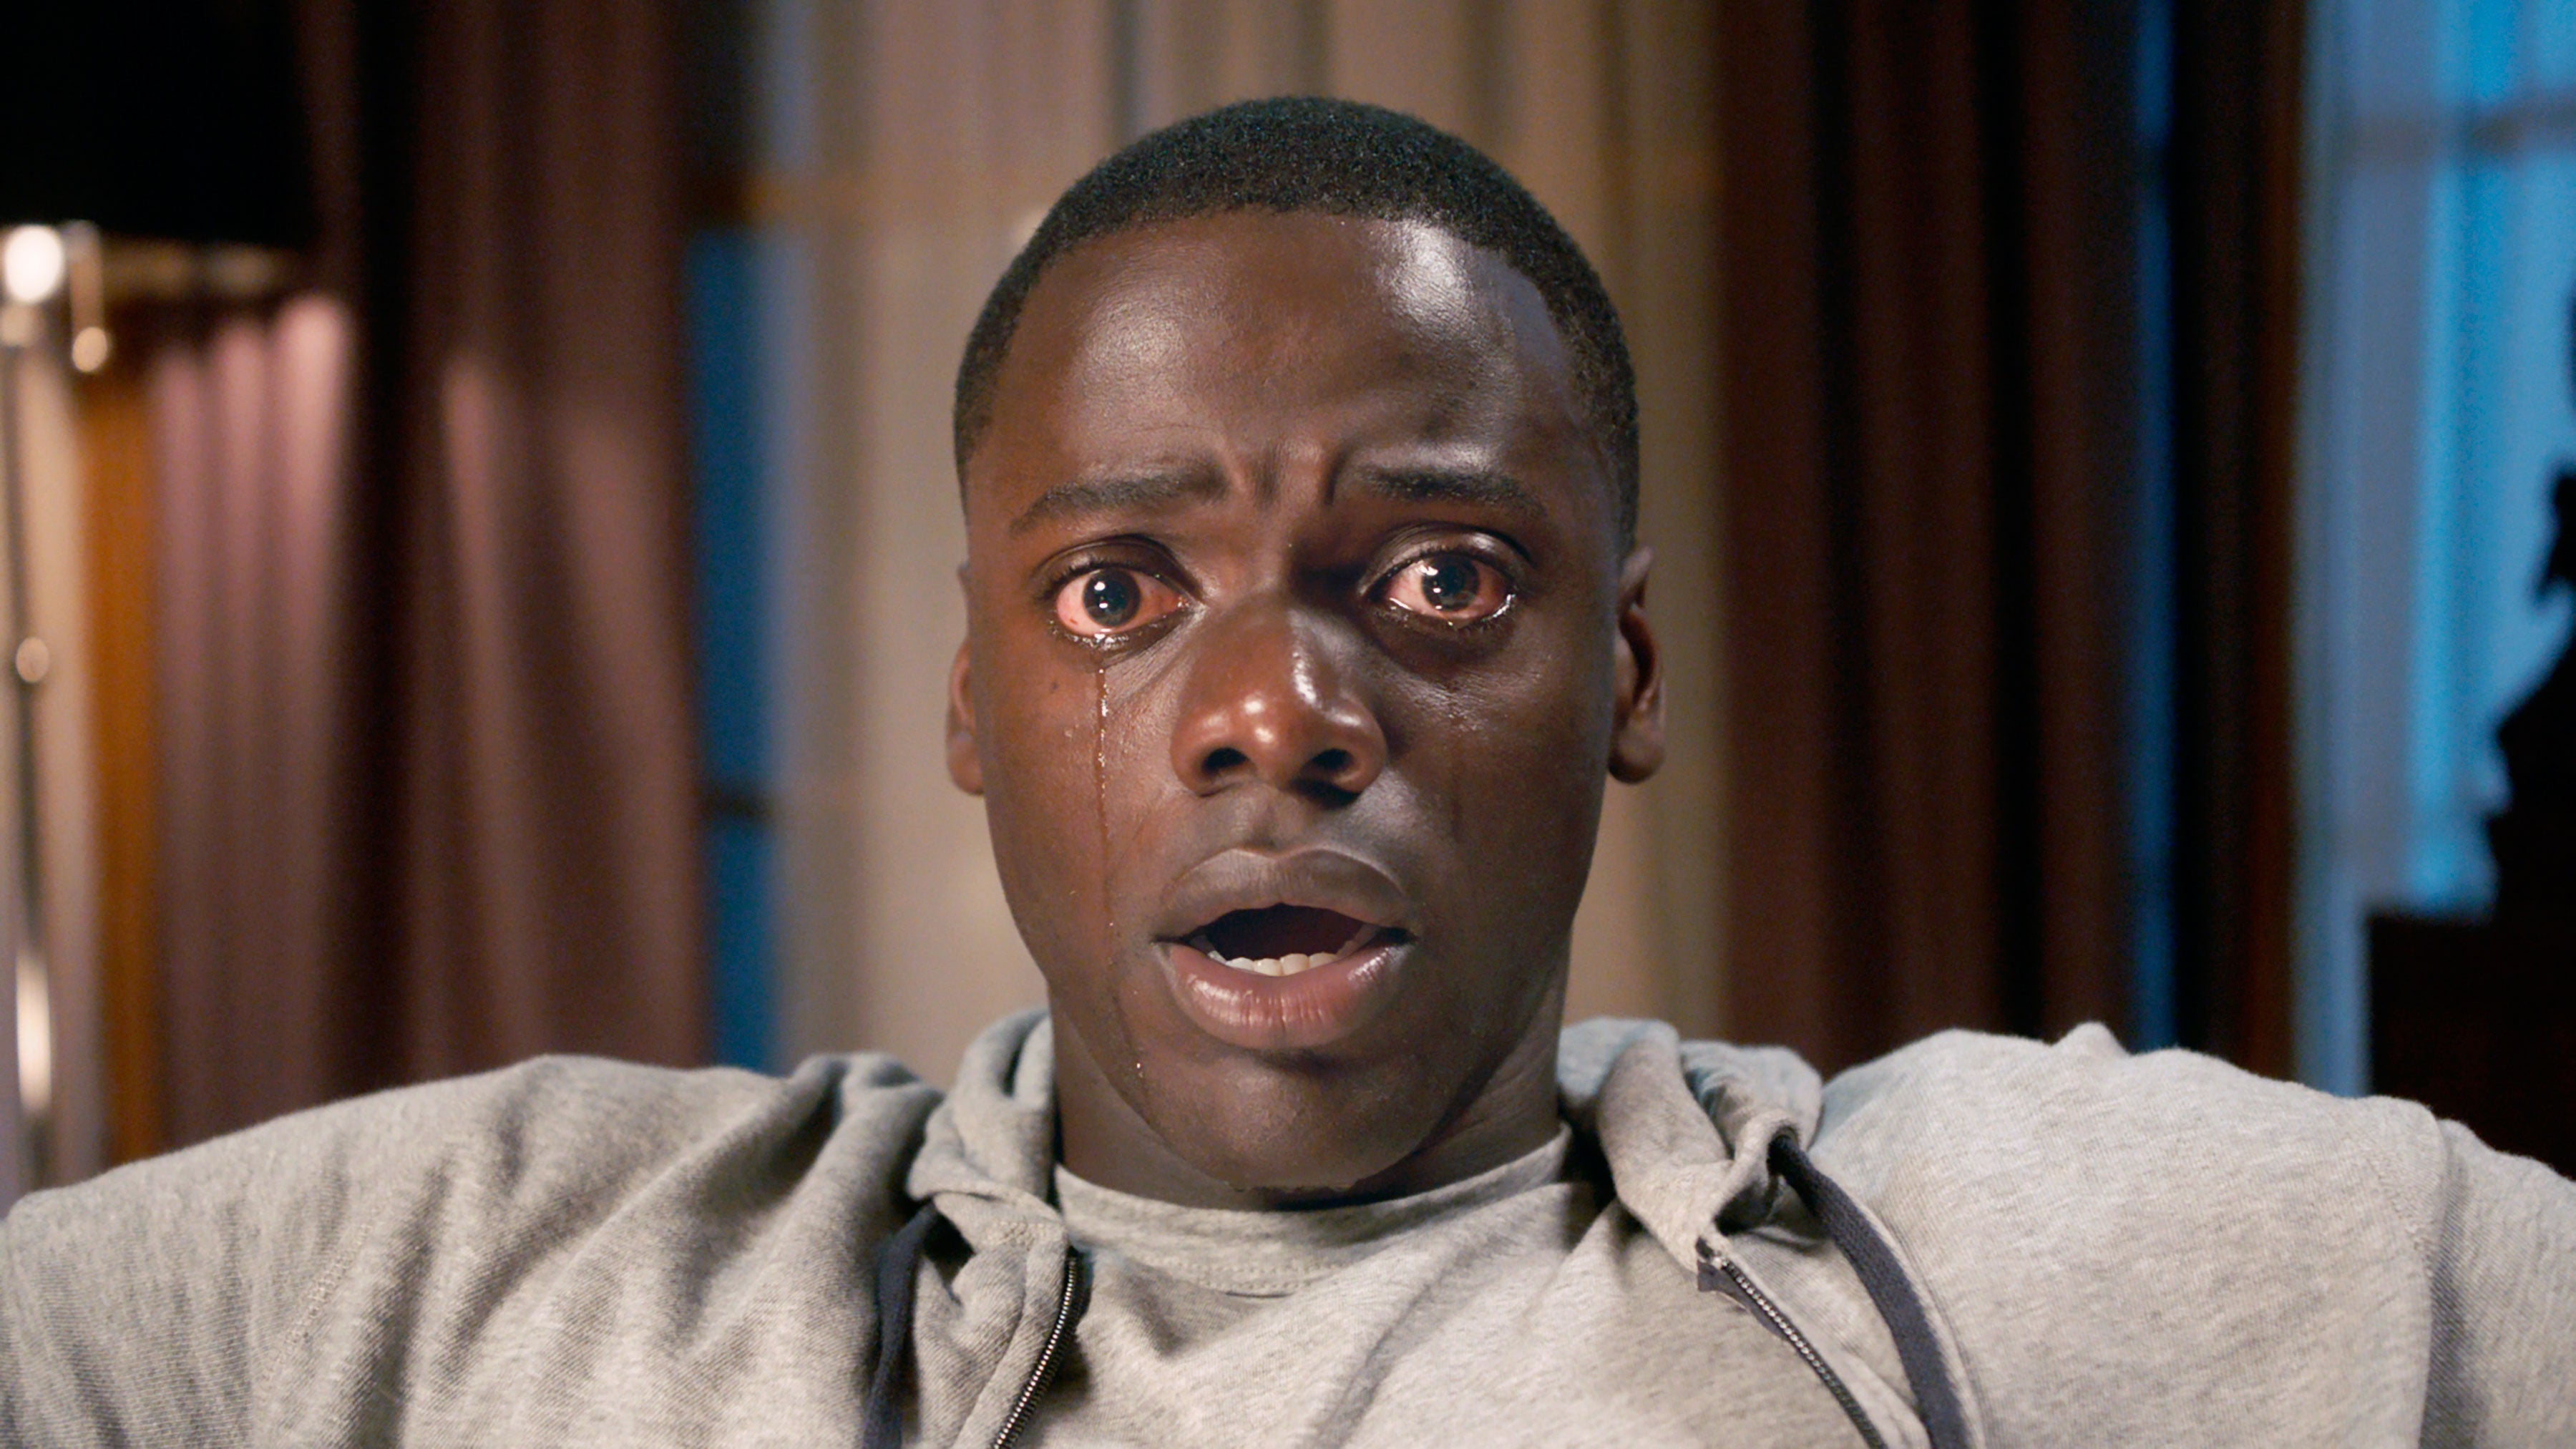 'Get Out' And 'Mudbound' Rack Up Well-Deserved Oscar Nominations